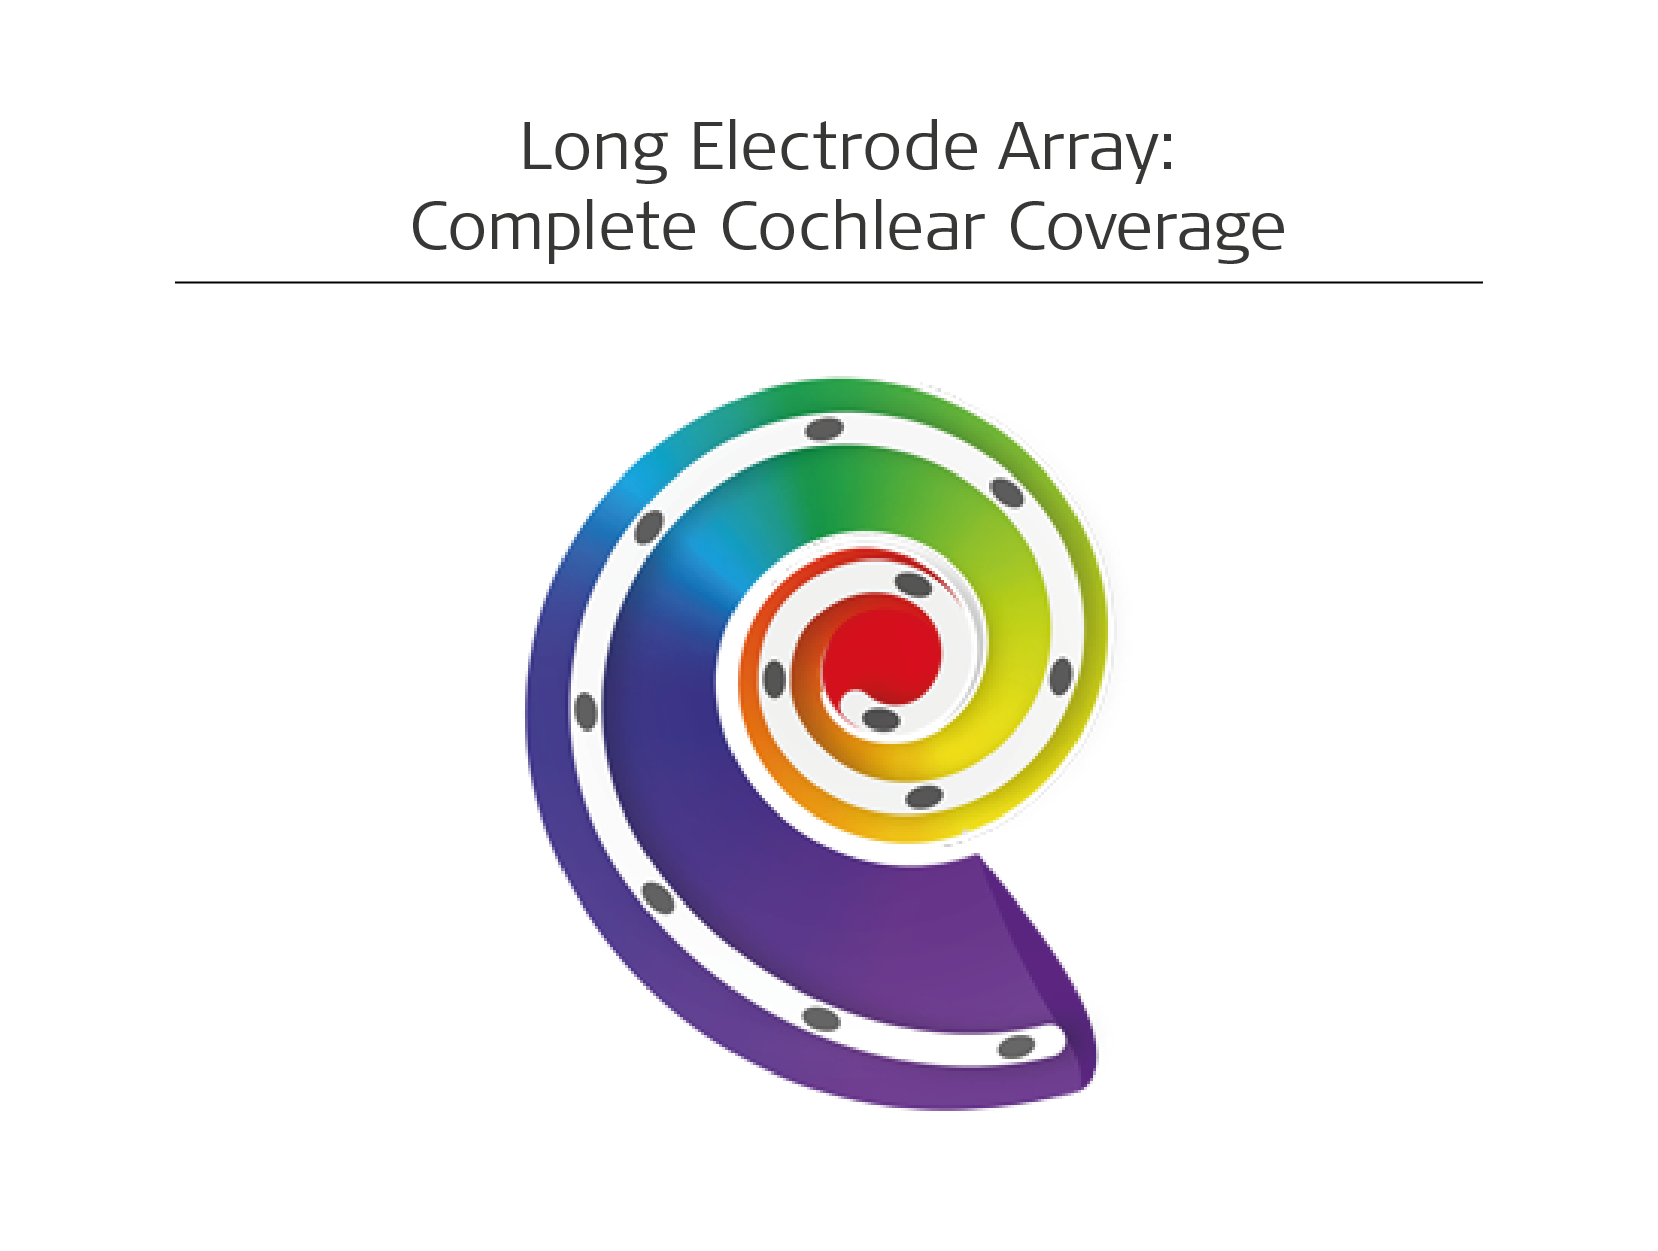 Long electrode array Complete Cochlear Coverage